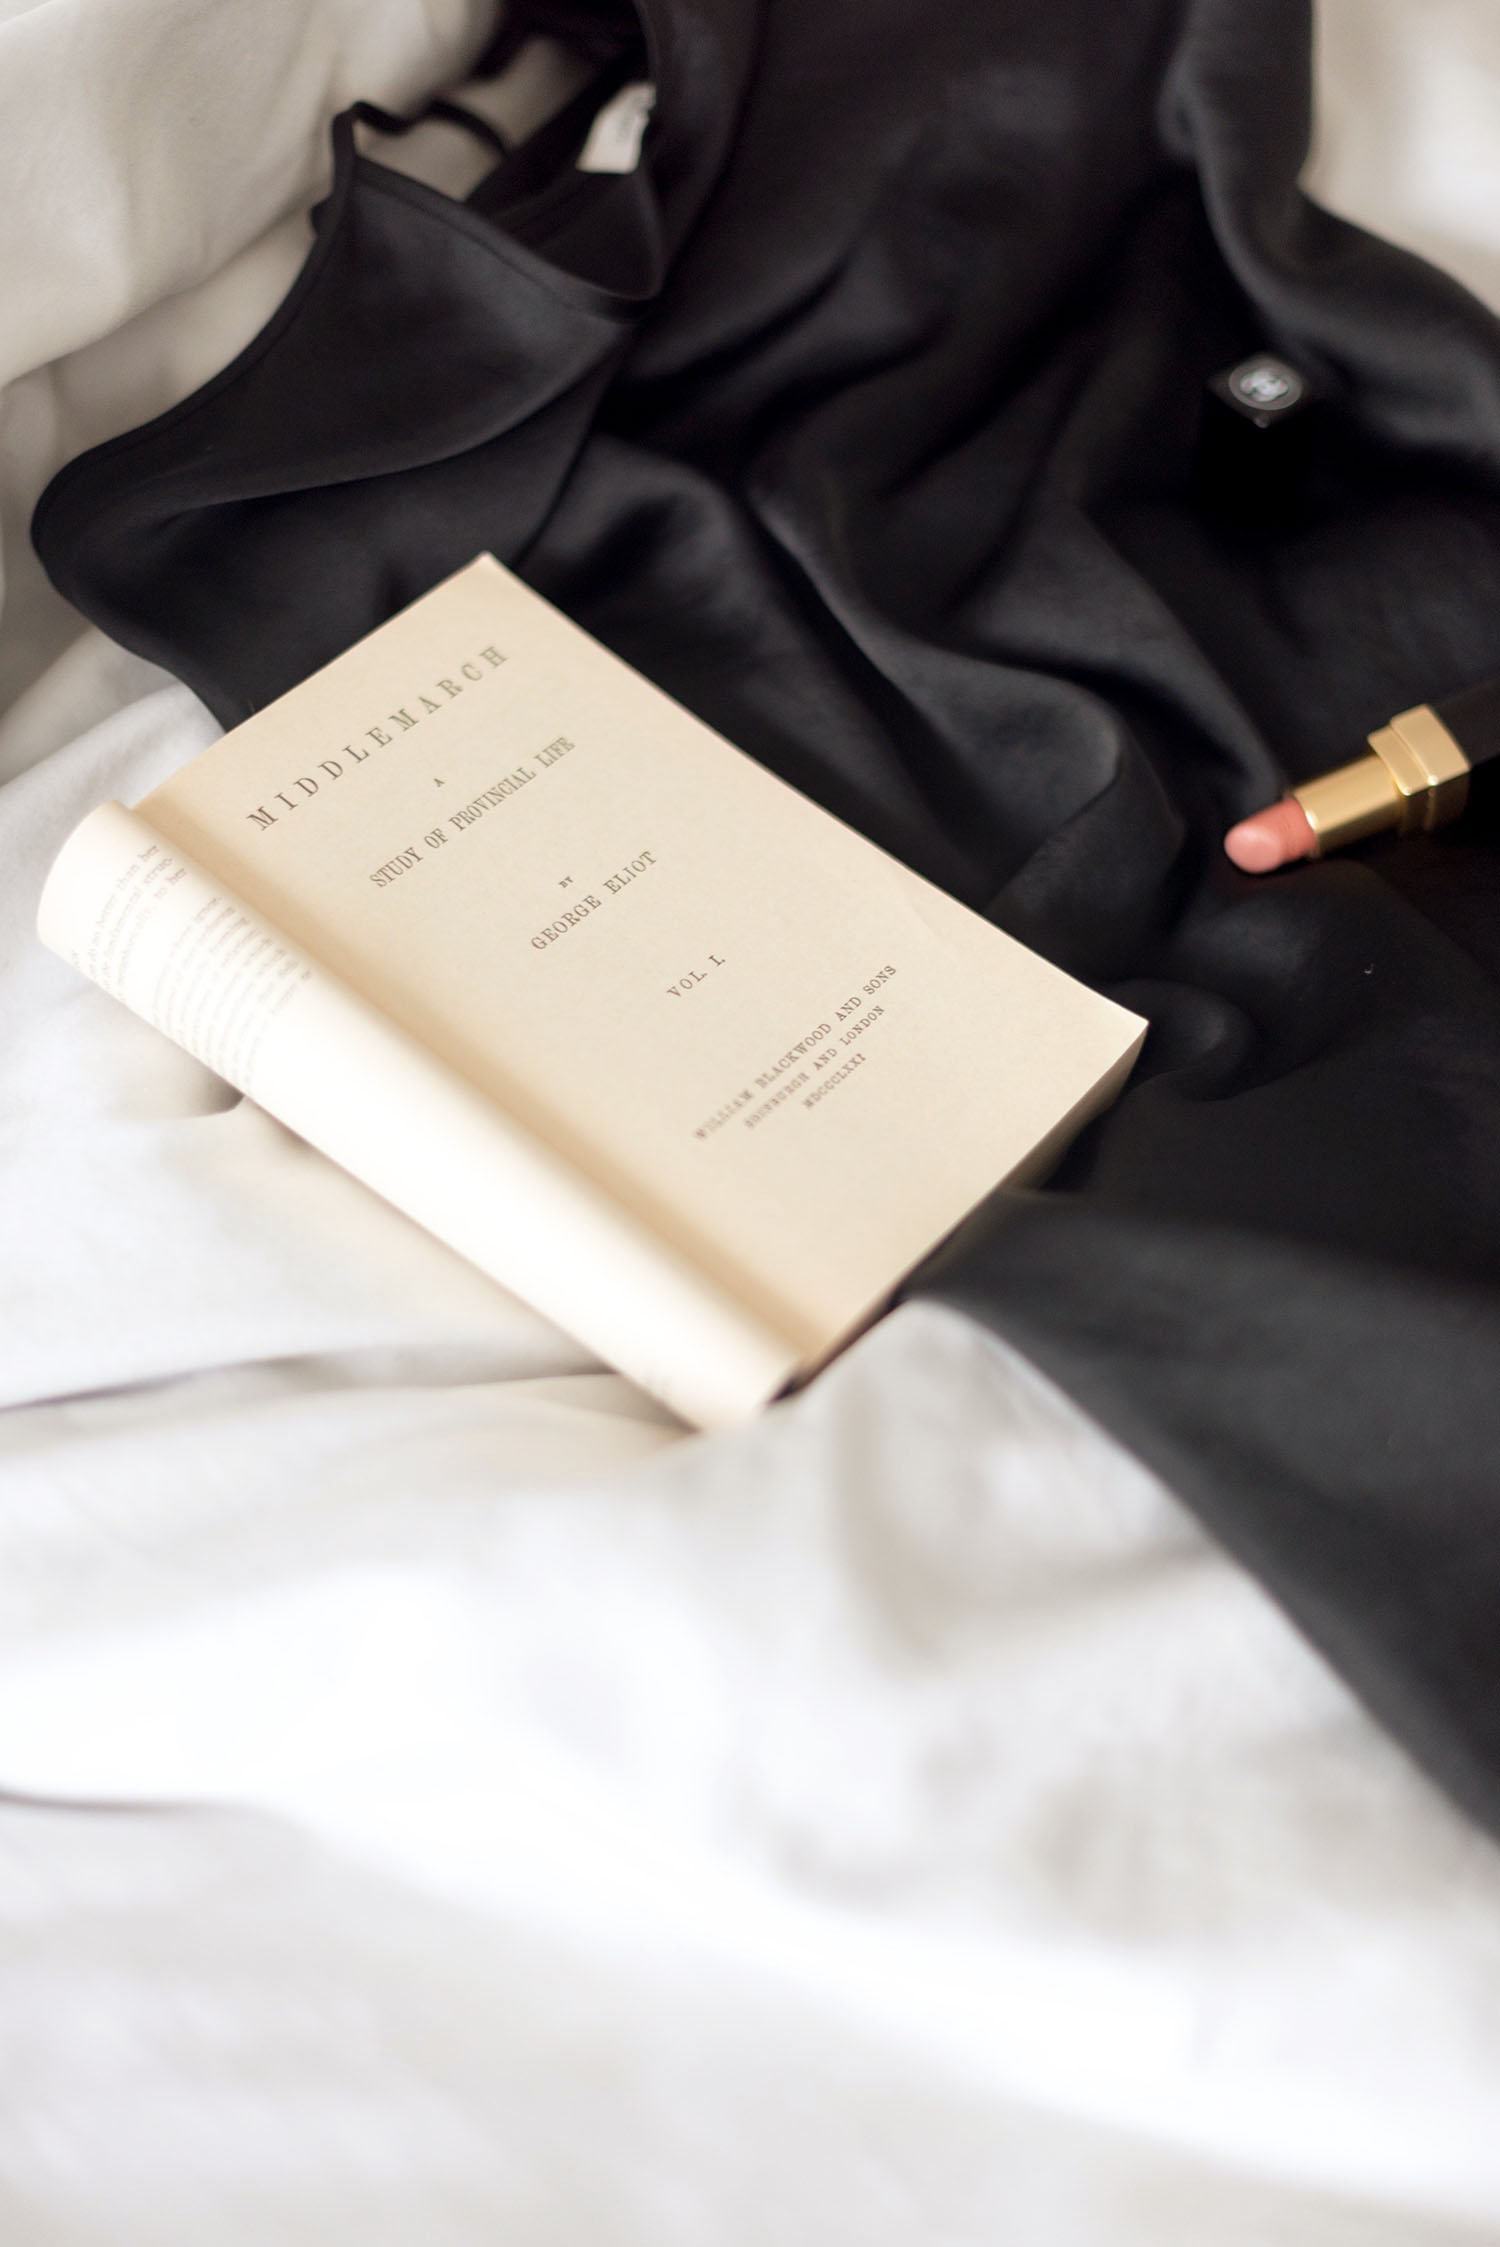 Coco & Vera - Middlemarch novel, Wilfred slip dress, Chanel lipstick, George Eliot book